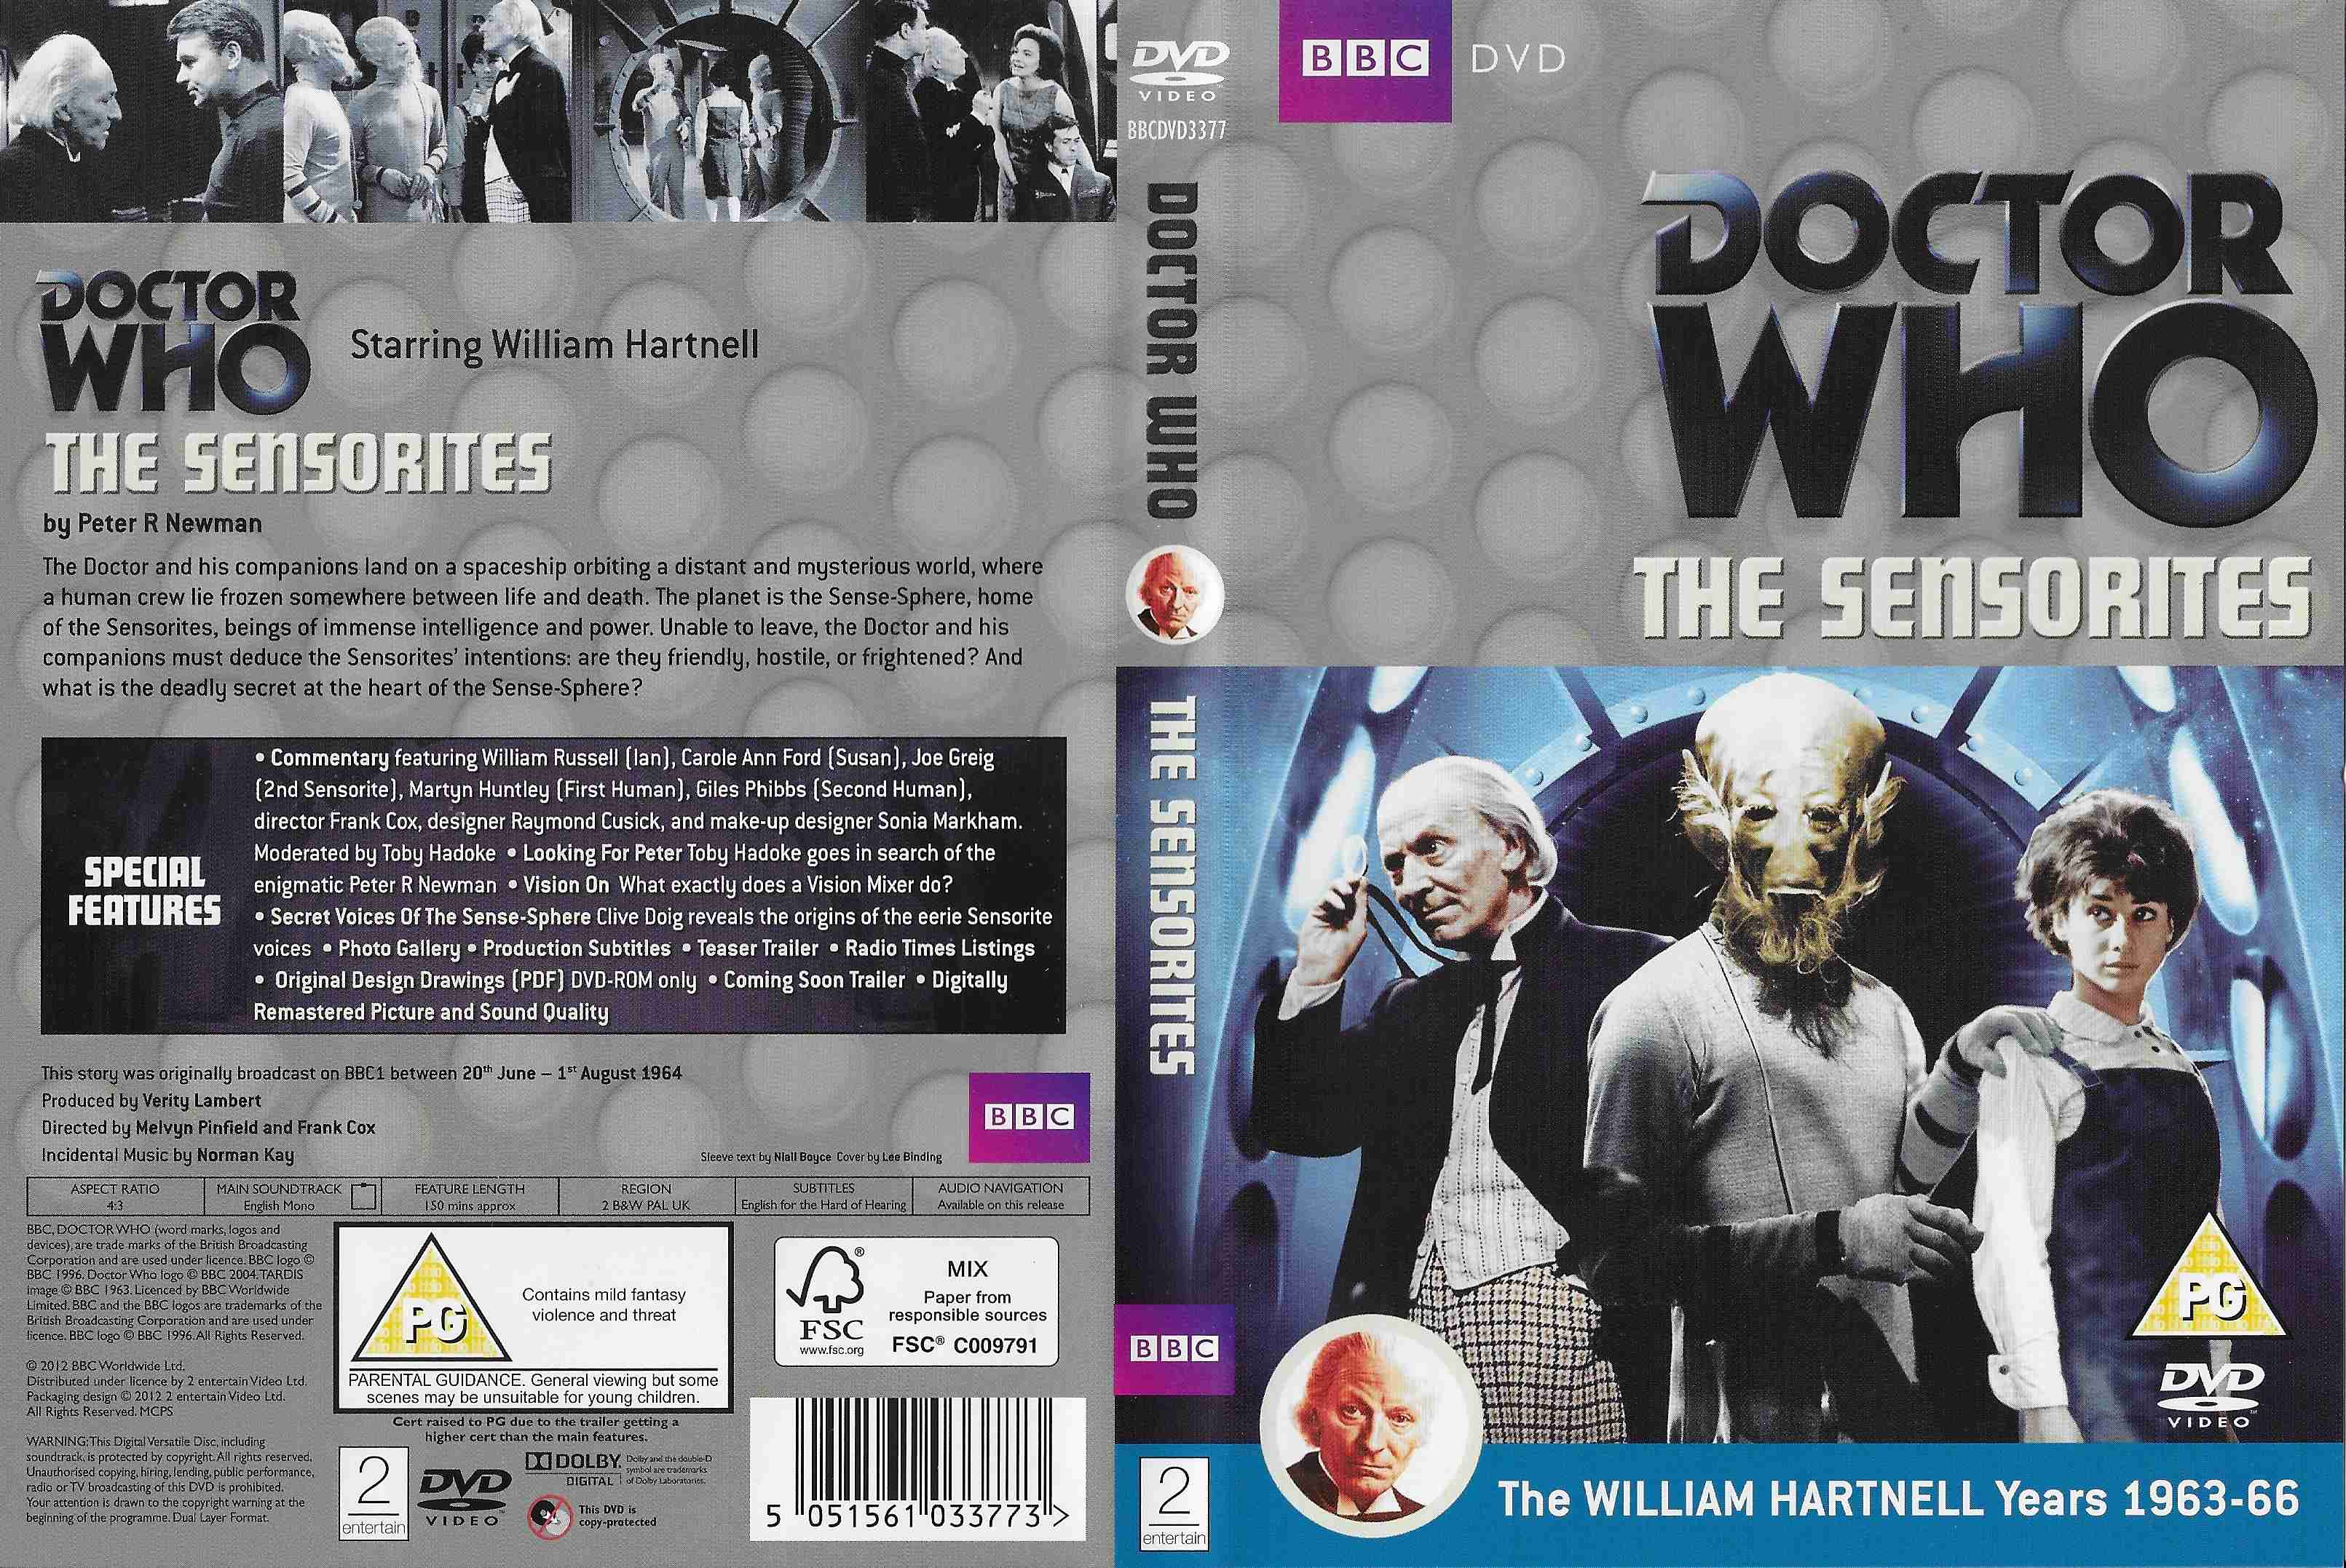 Picture of BBCDVD 3377 Doctor Who - The Sensorites by artist Peter R. Newman from the BBC records and Tapes library